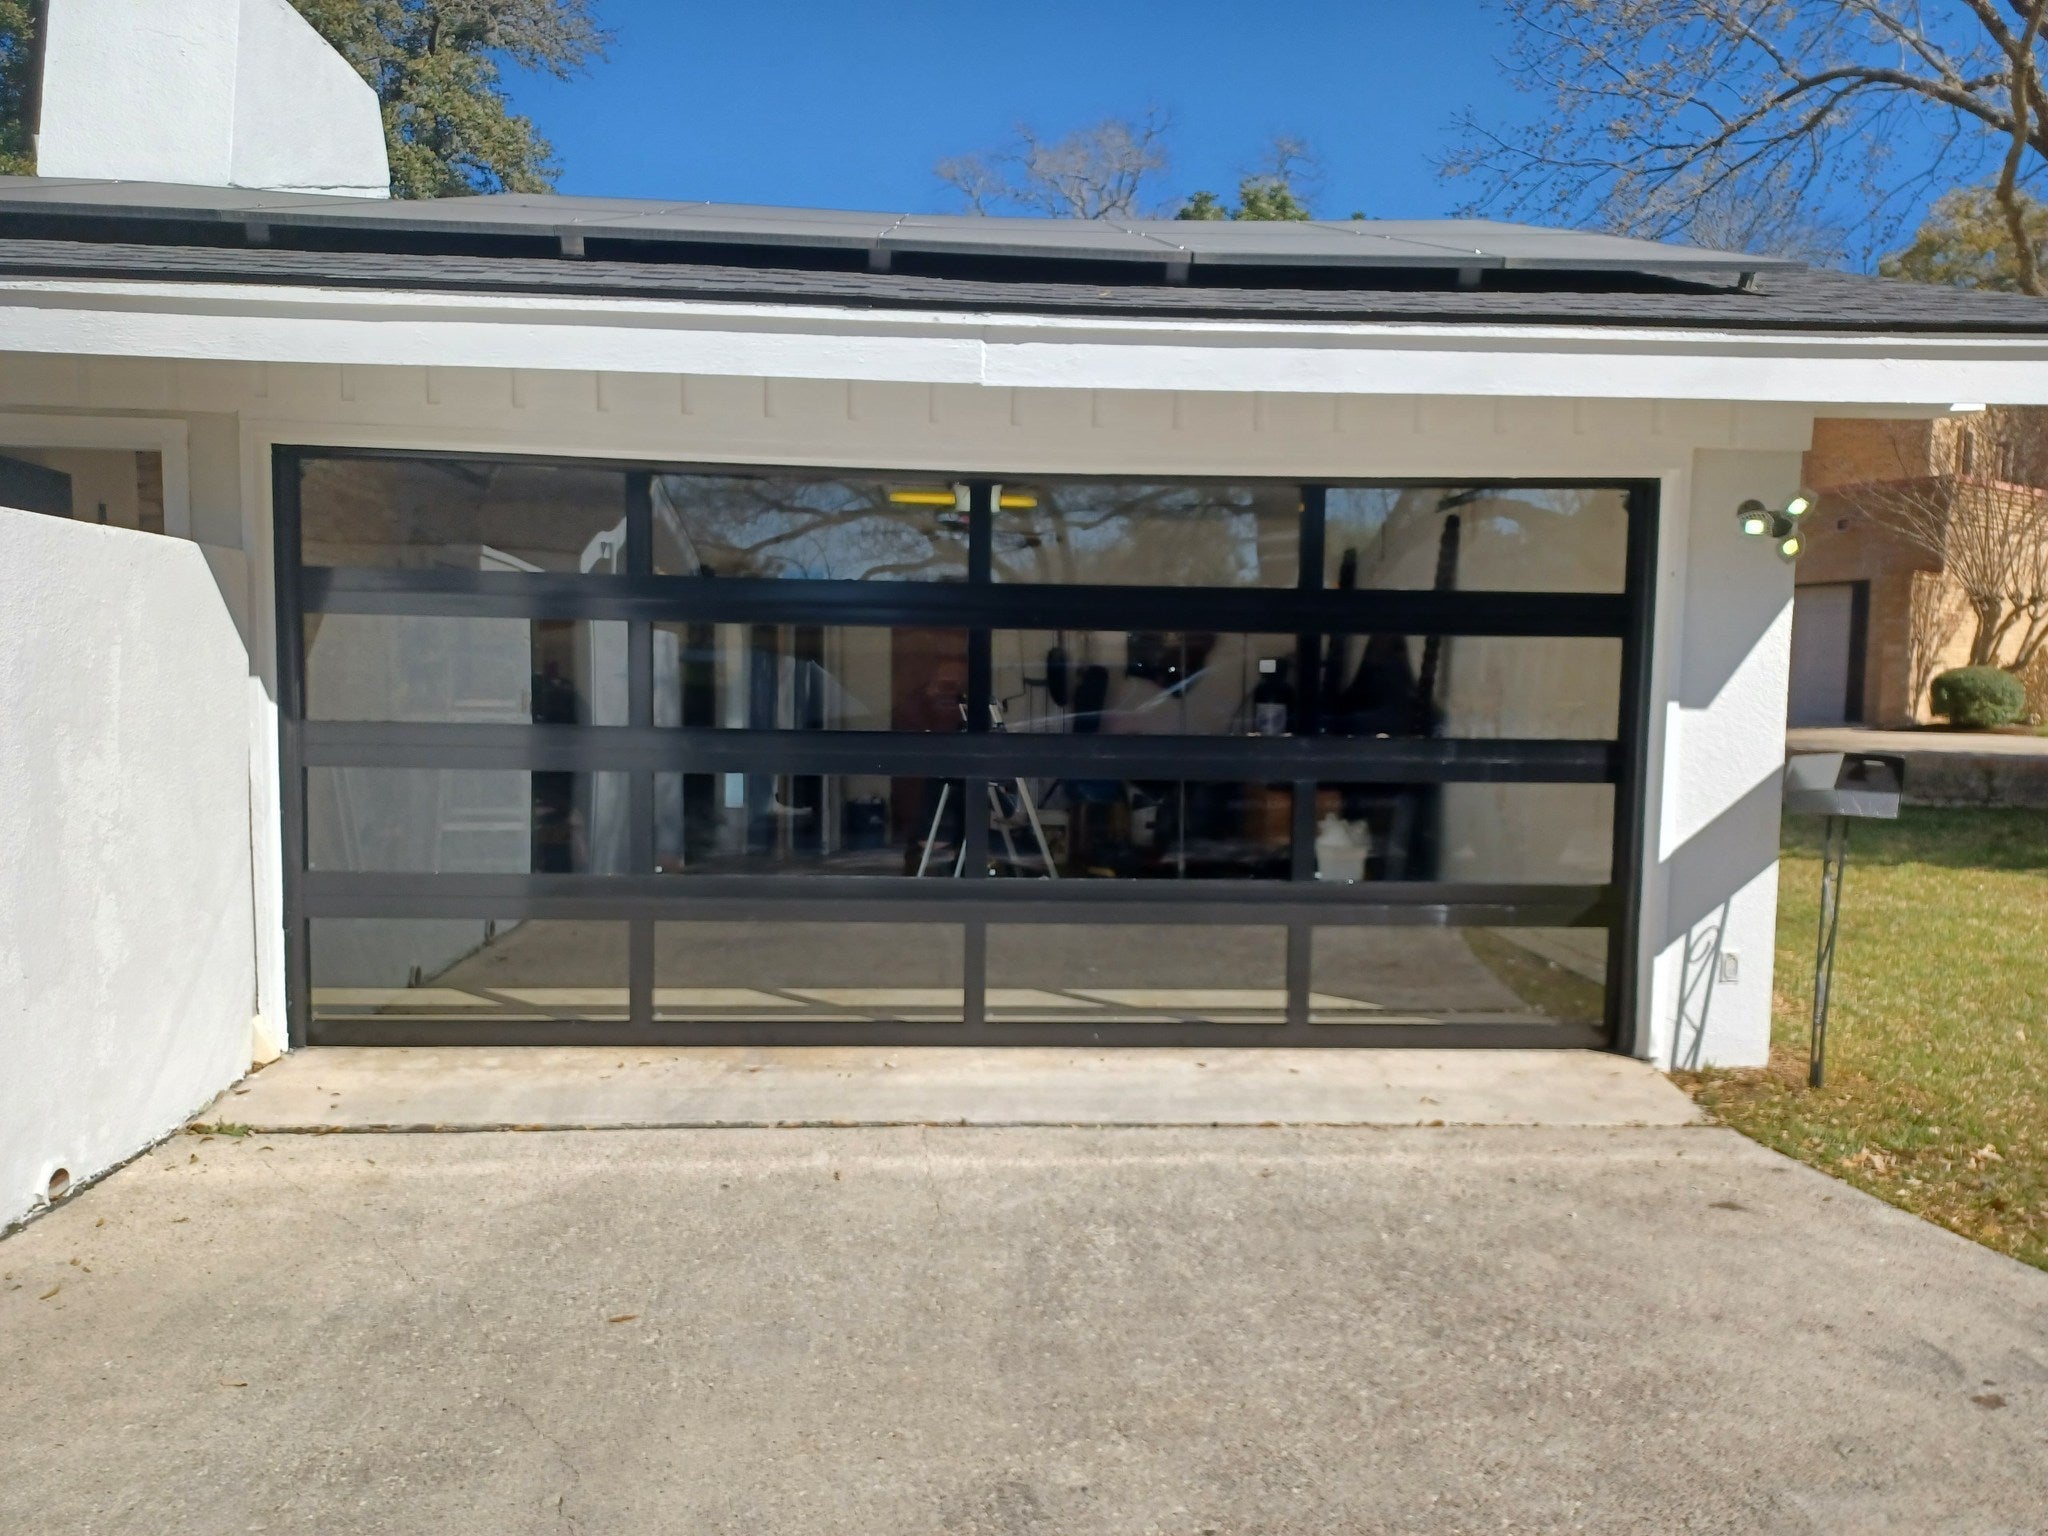 18 FT Wide By 7 FT Tall Full View Garage Door Matt Black Finish With Clear Glass